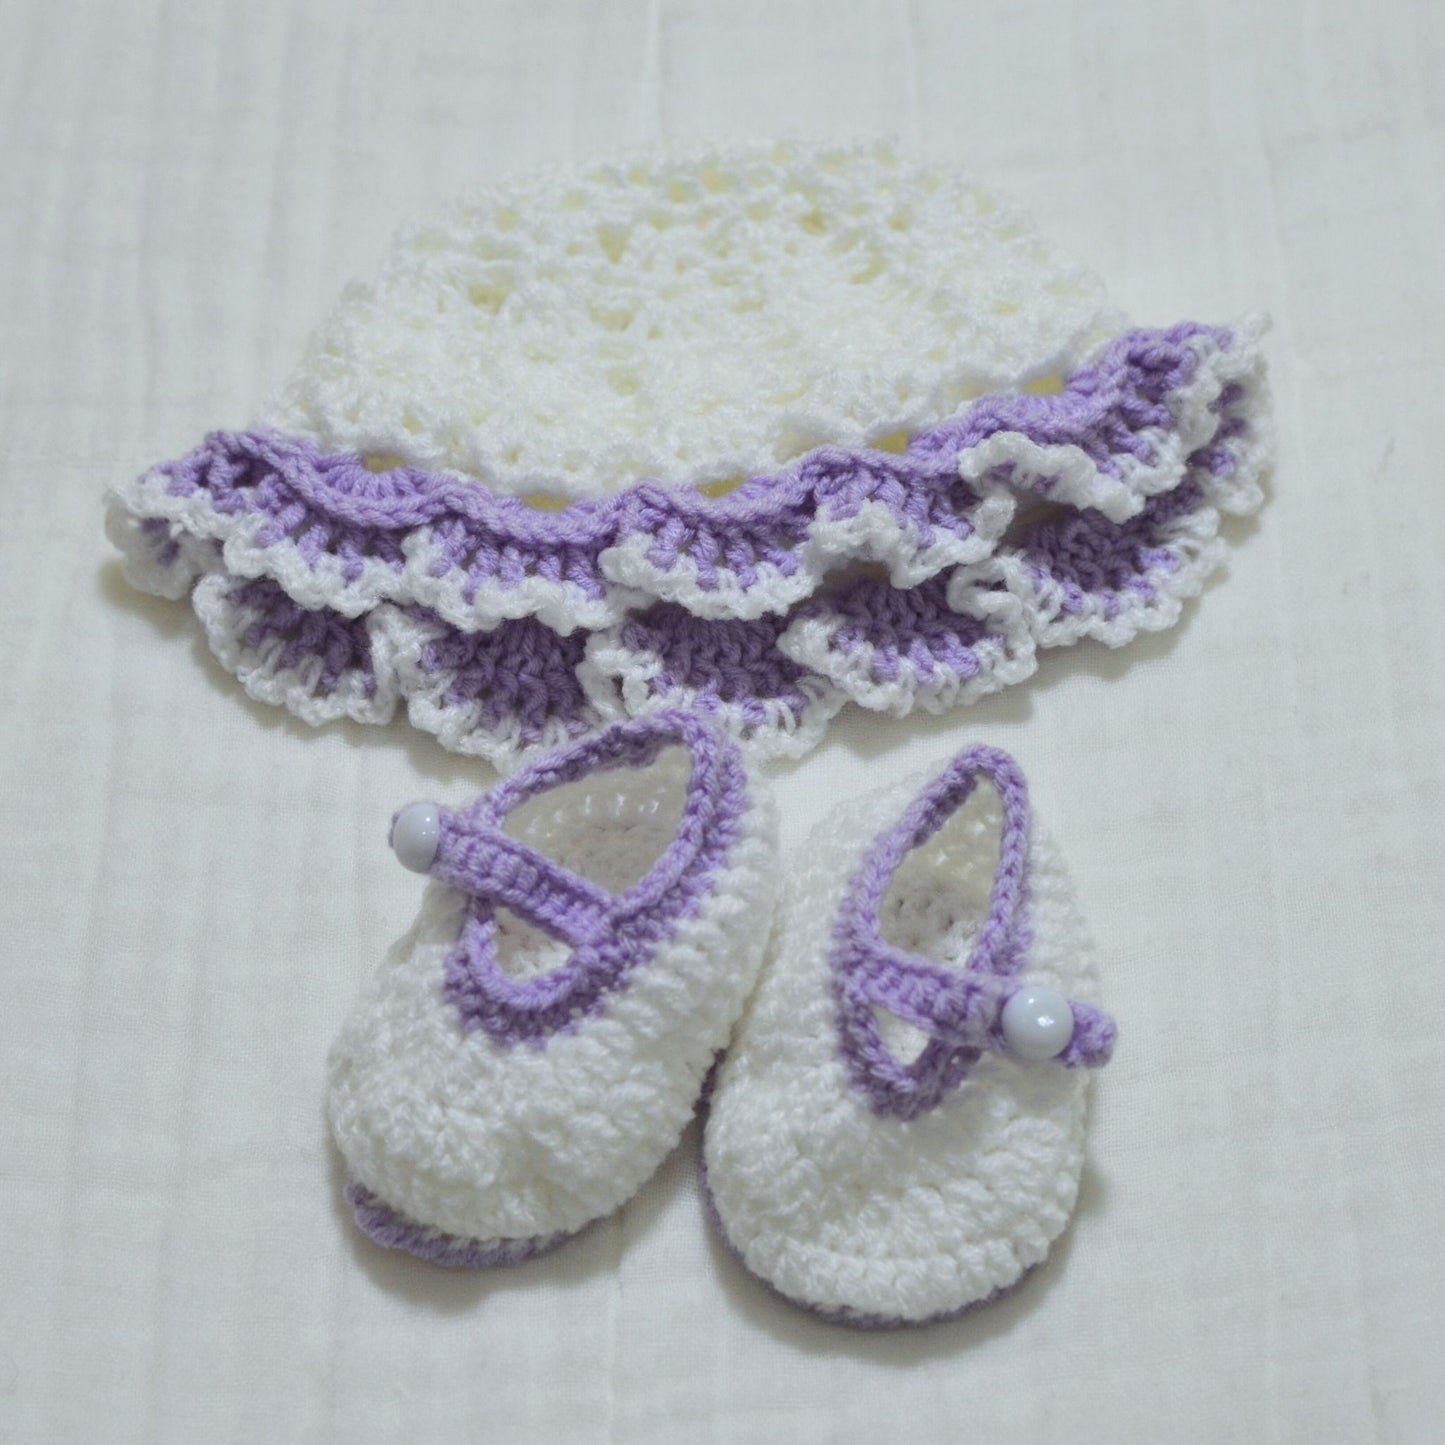 Crochet Baby Hat and Socks Set 0 to 3 Month